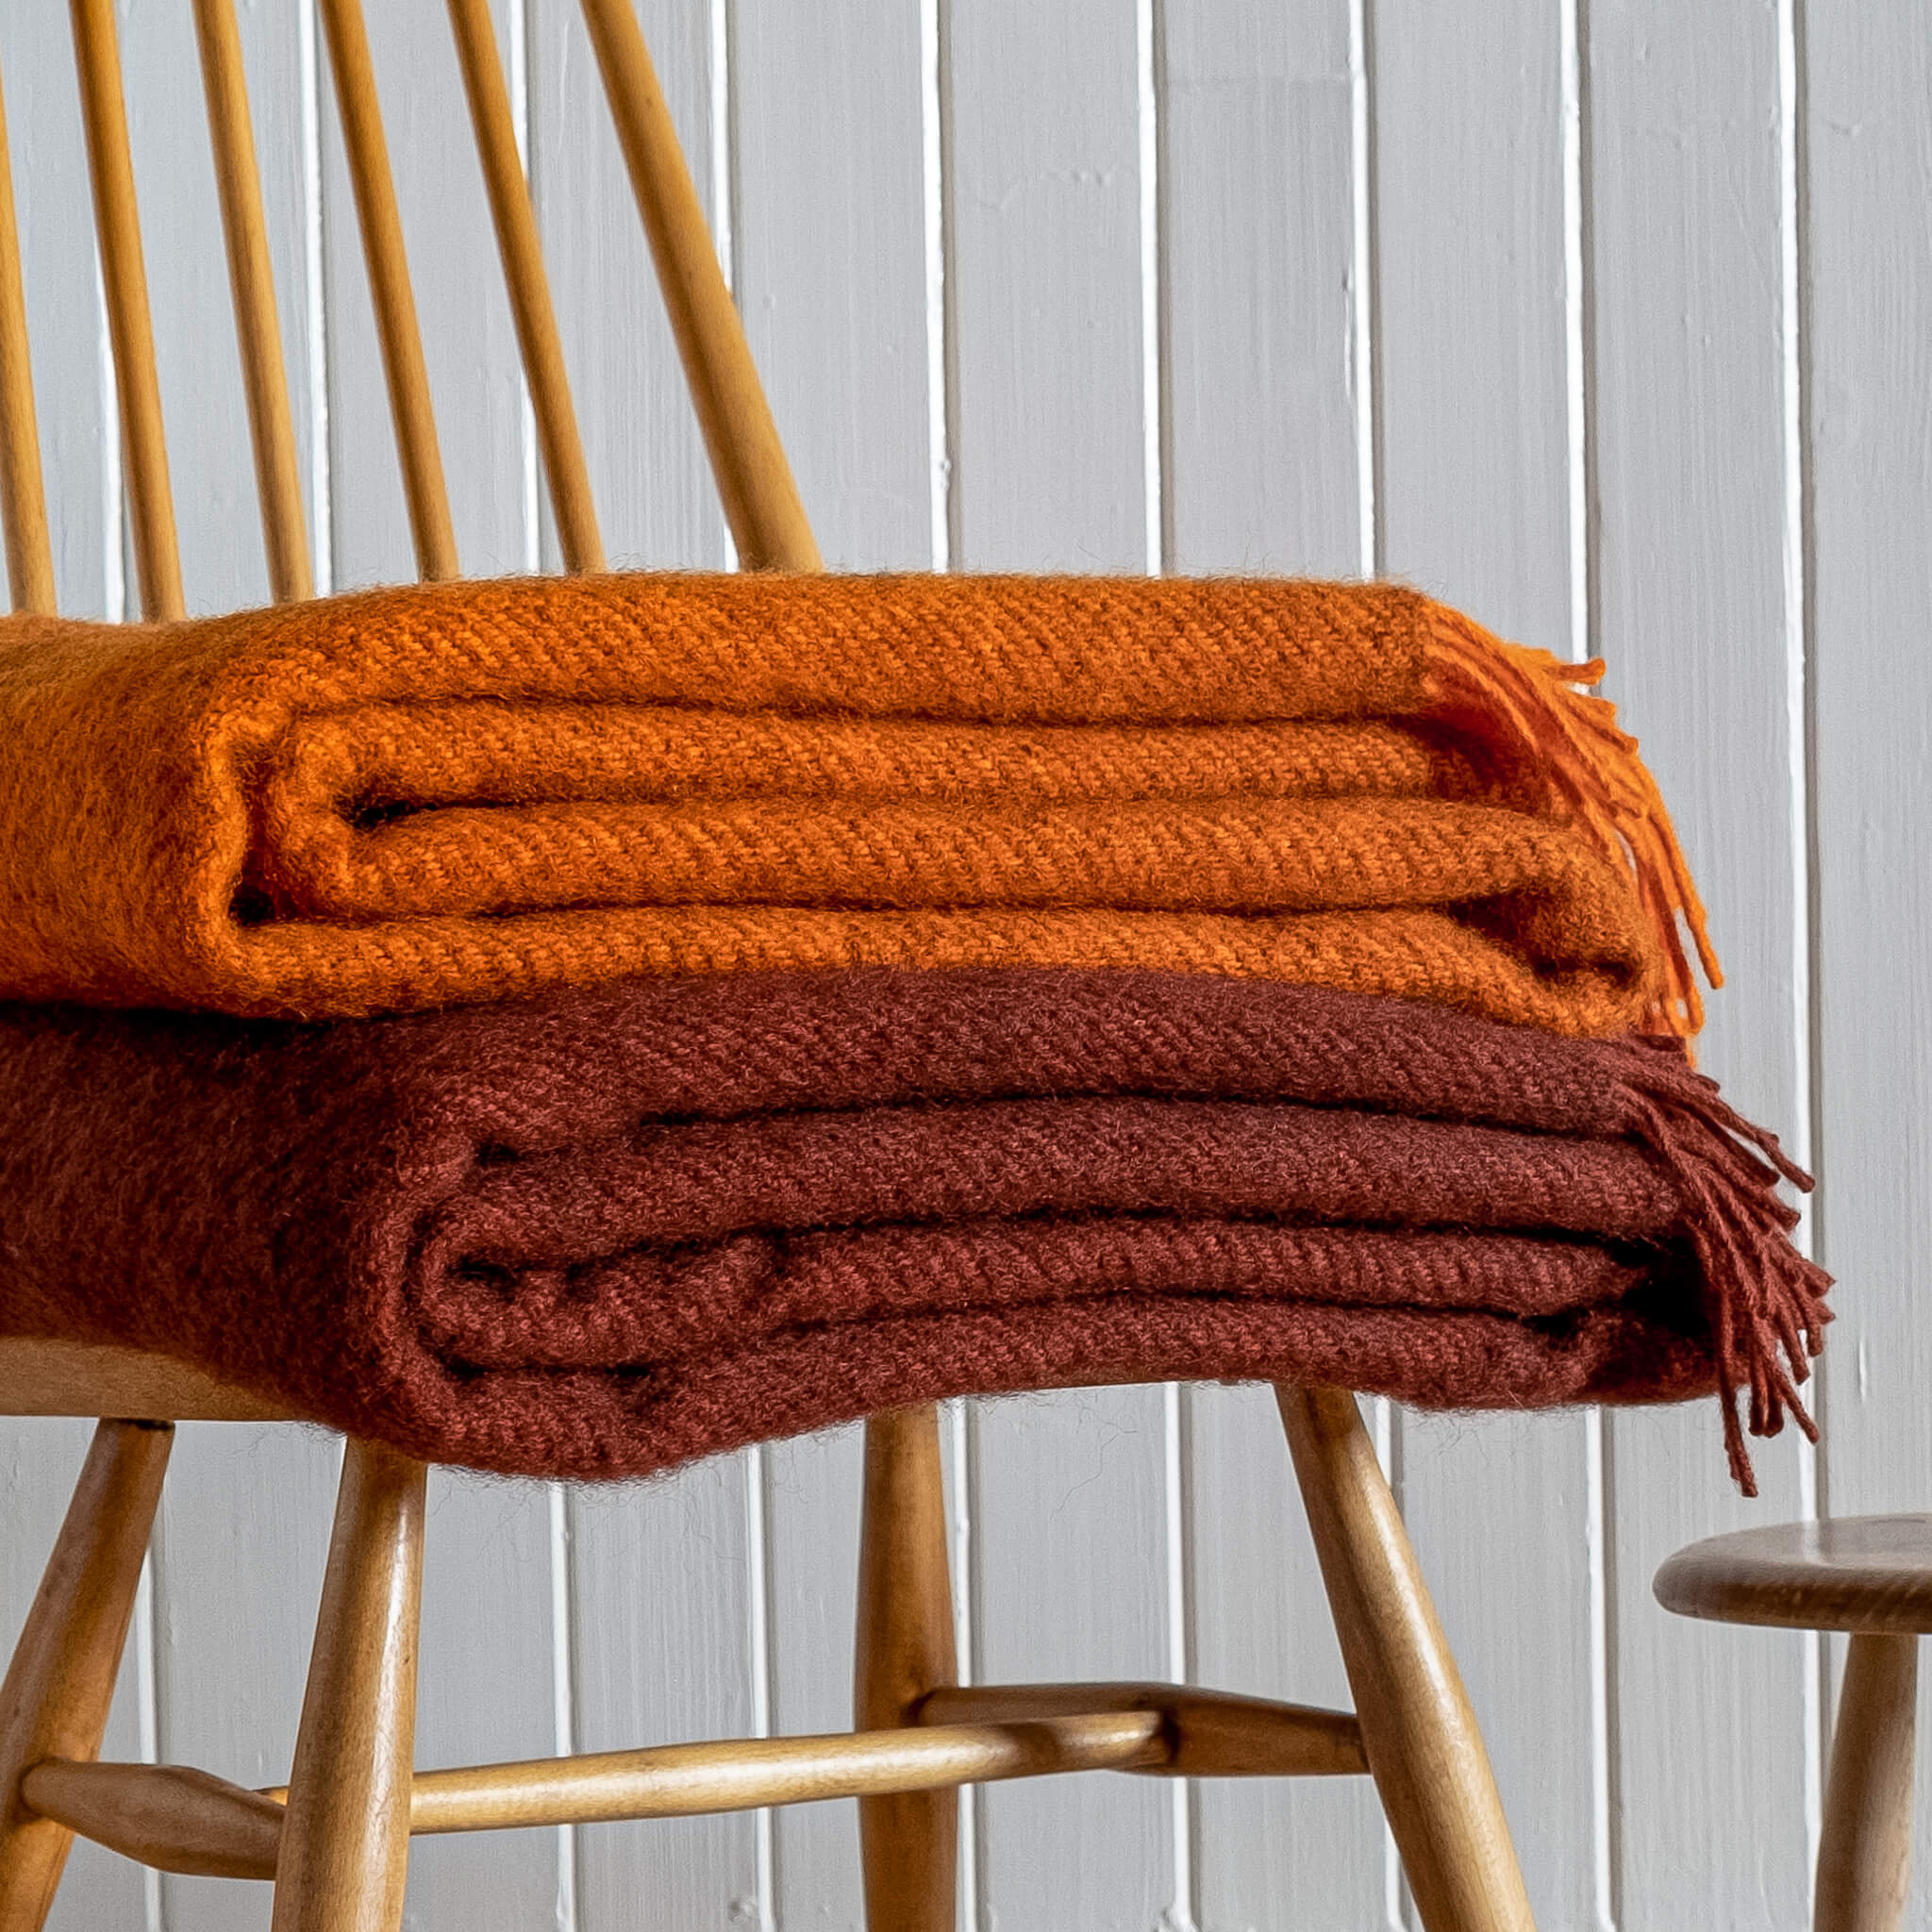 Close up of Gotland Wool Blanket – Rust &amp; Orange folded on a chair